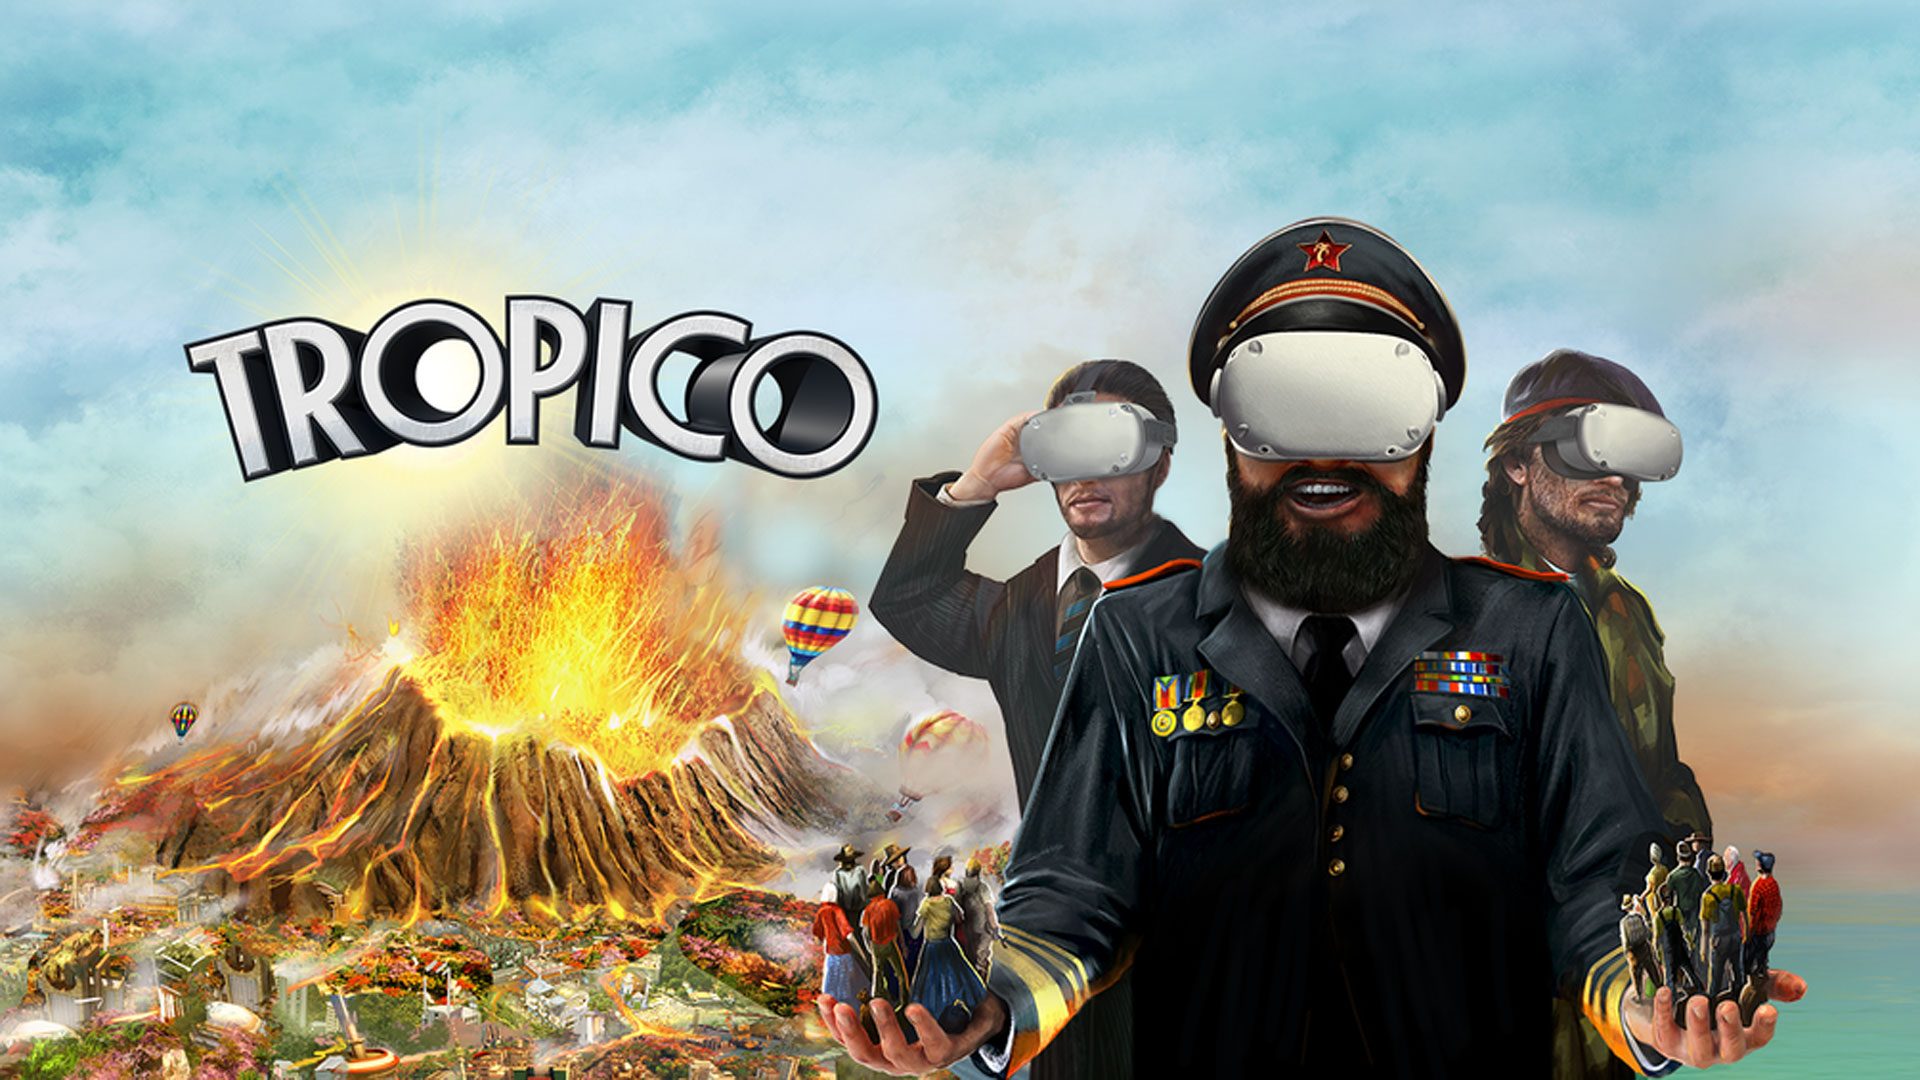 City Builder ‘Tropico’ Comes to Quest, Letting You Become El Presidente of Your Own Banana Republic